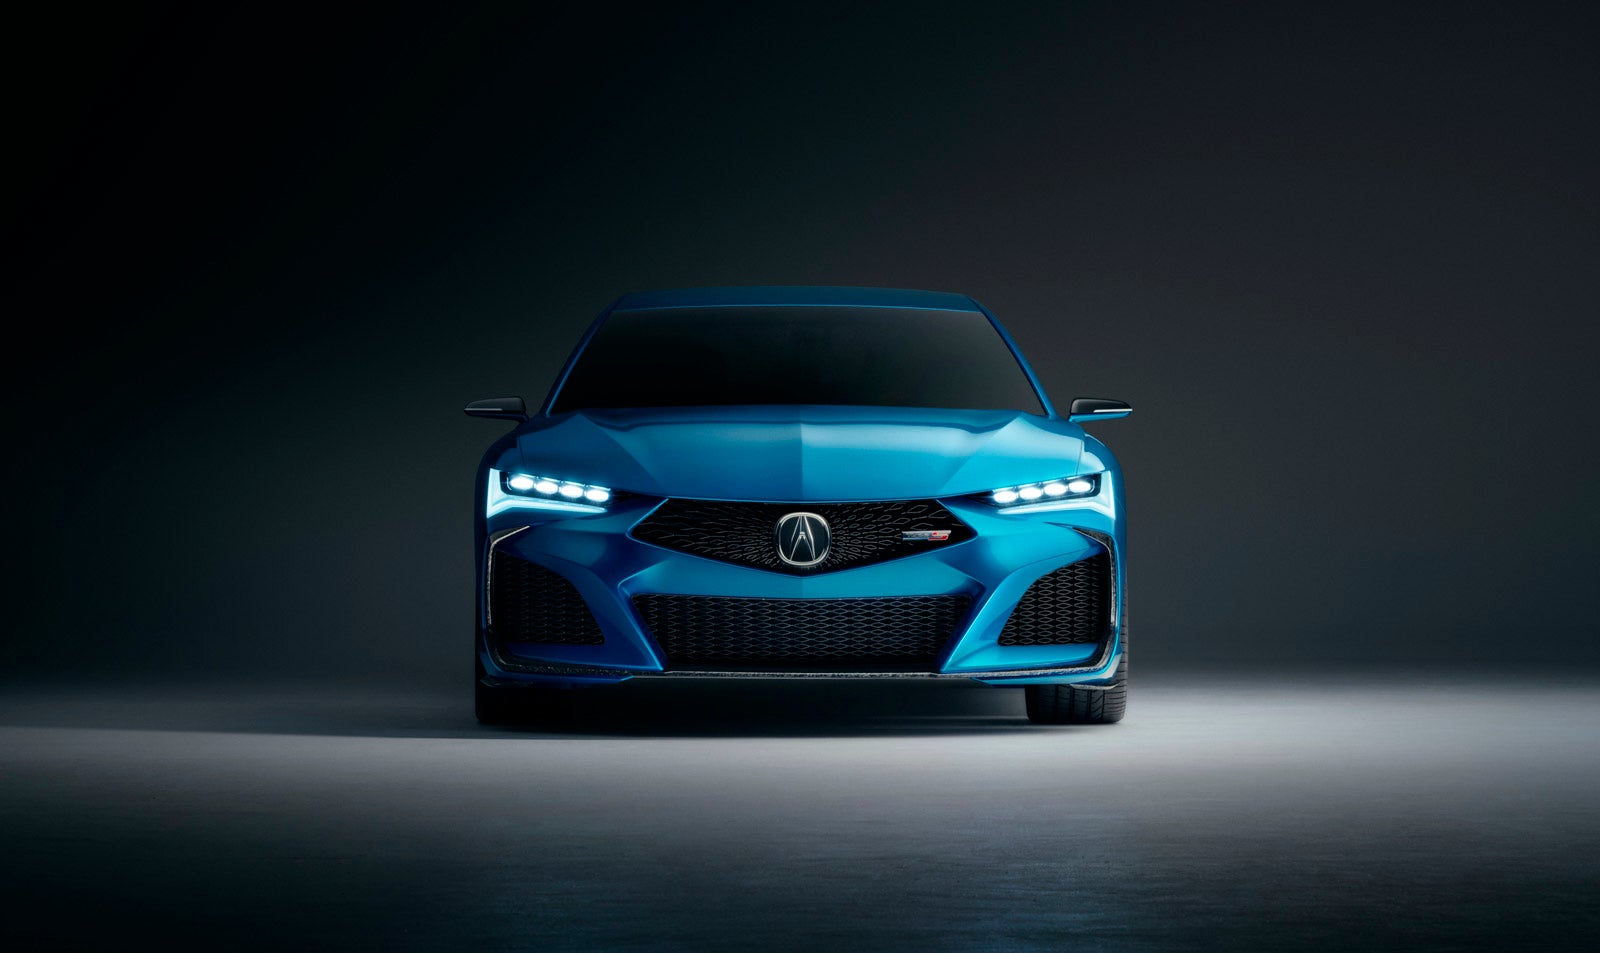 The New Acura Type S Concept Is Starting To Look Like The